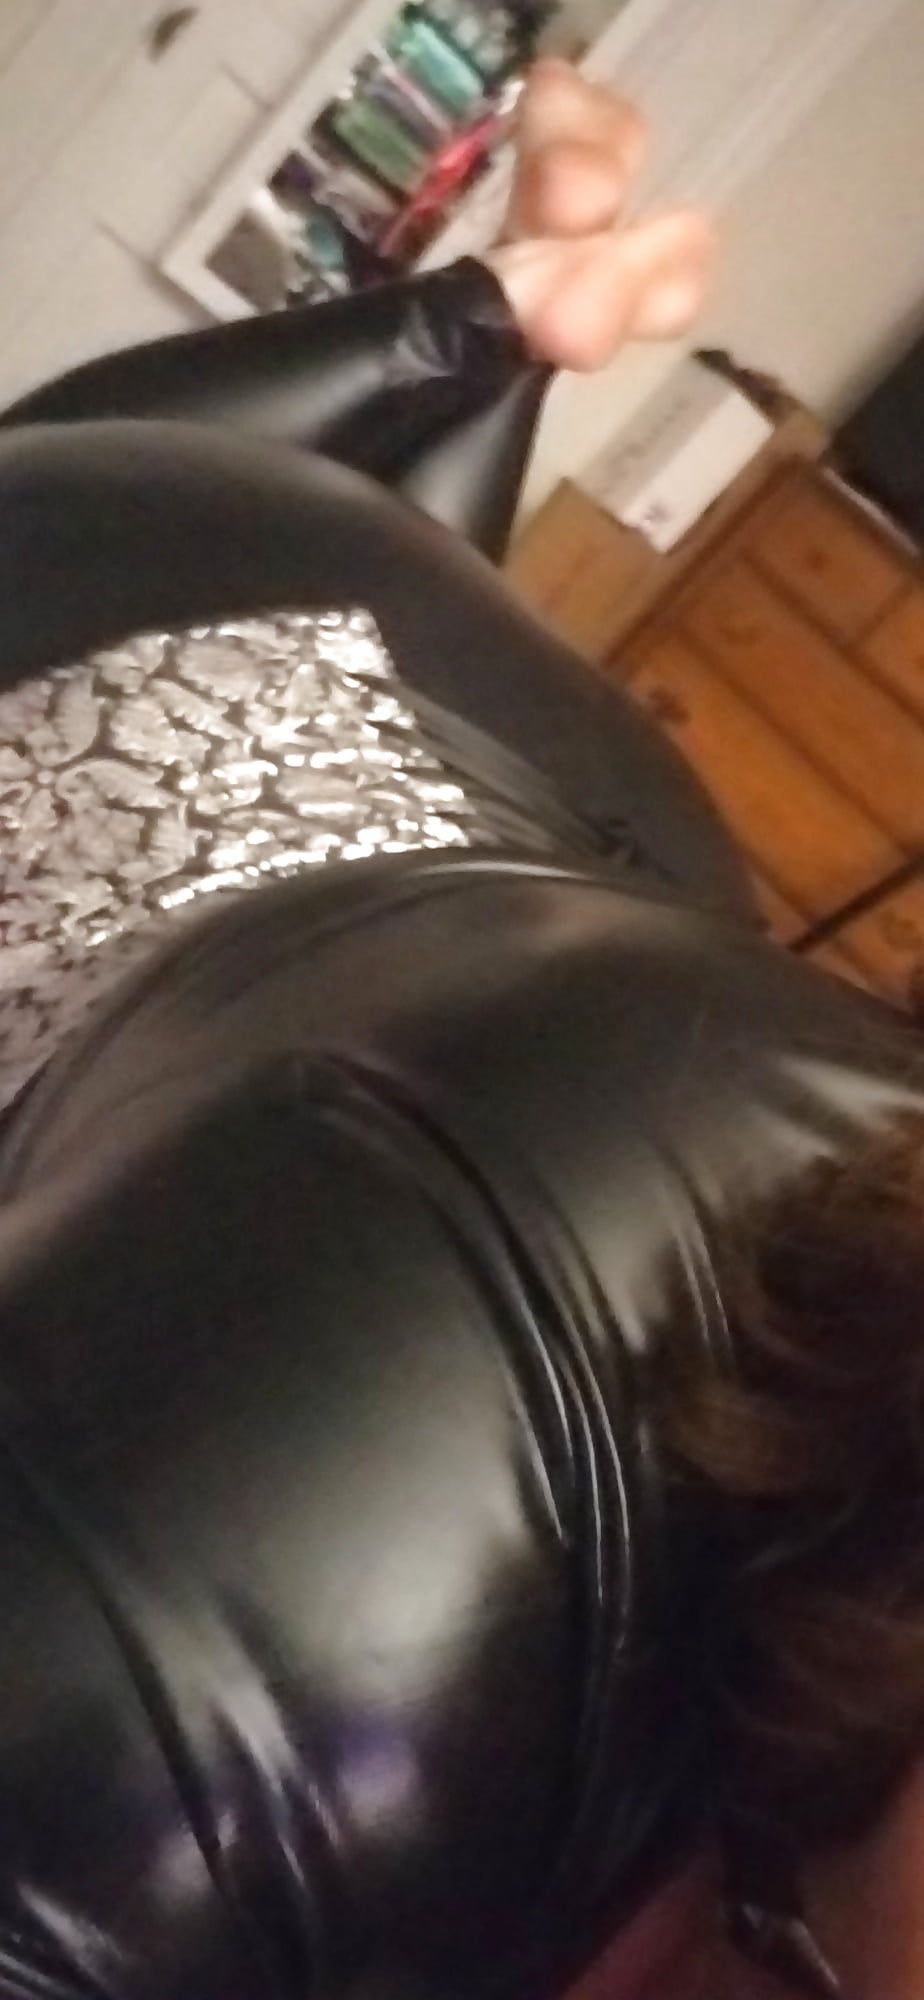 New cat suit birthday surprise for hubby - milf housewife  #37